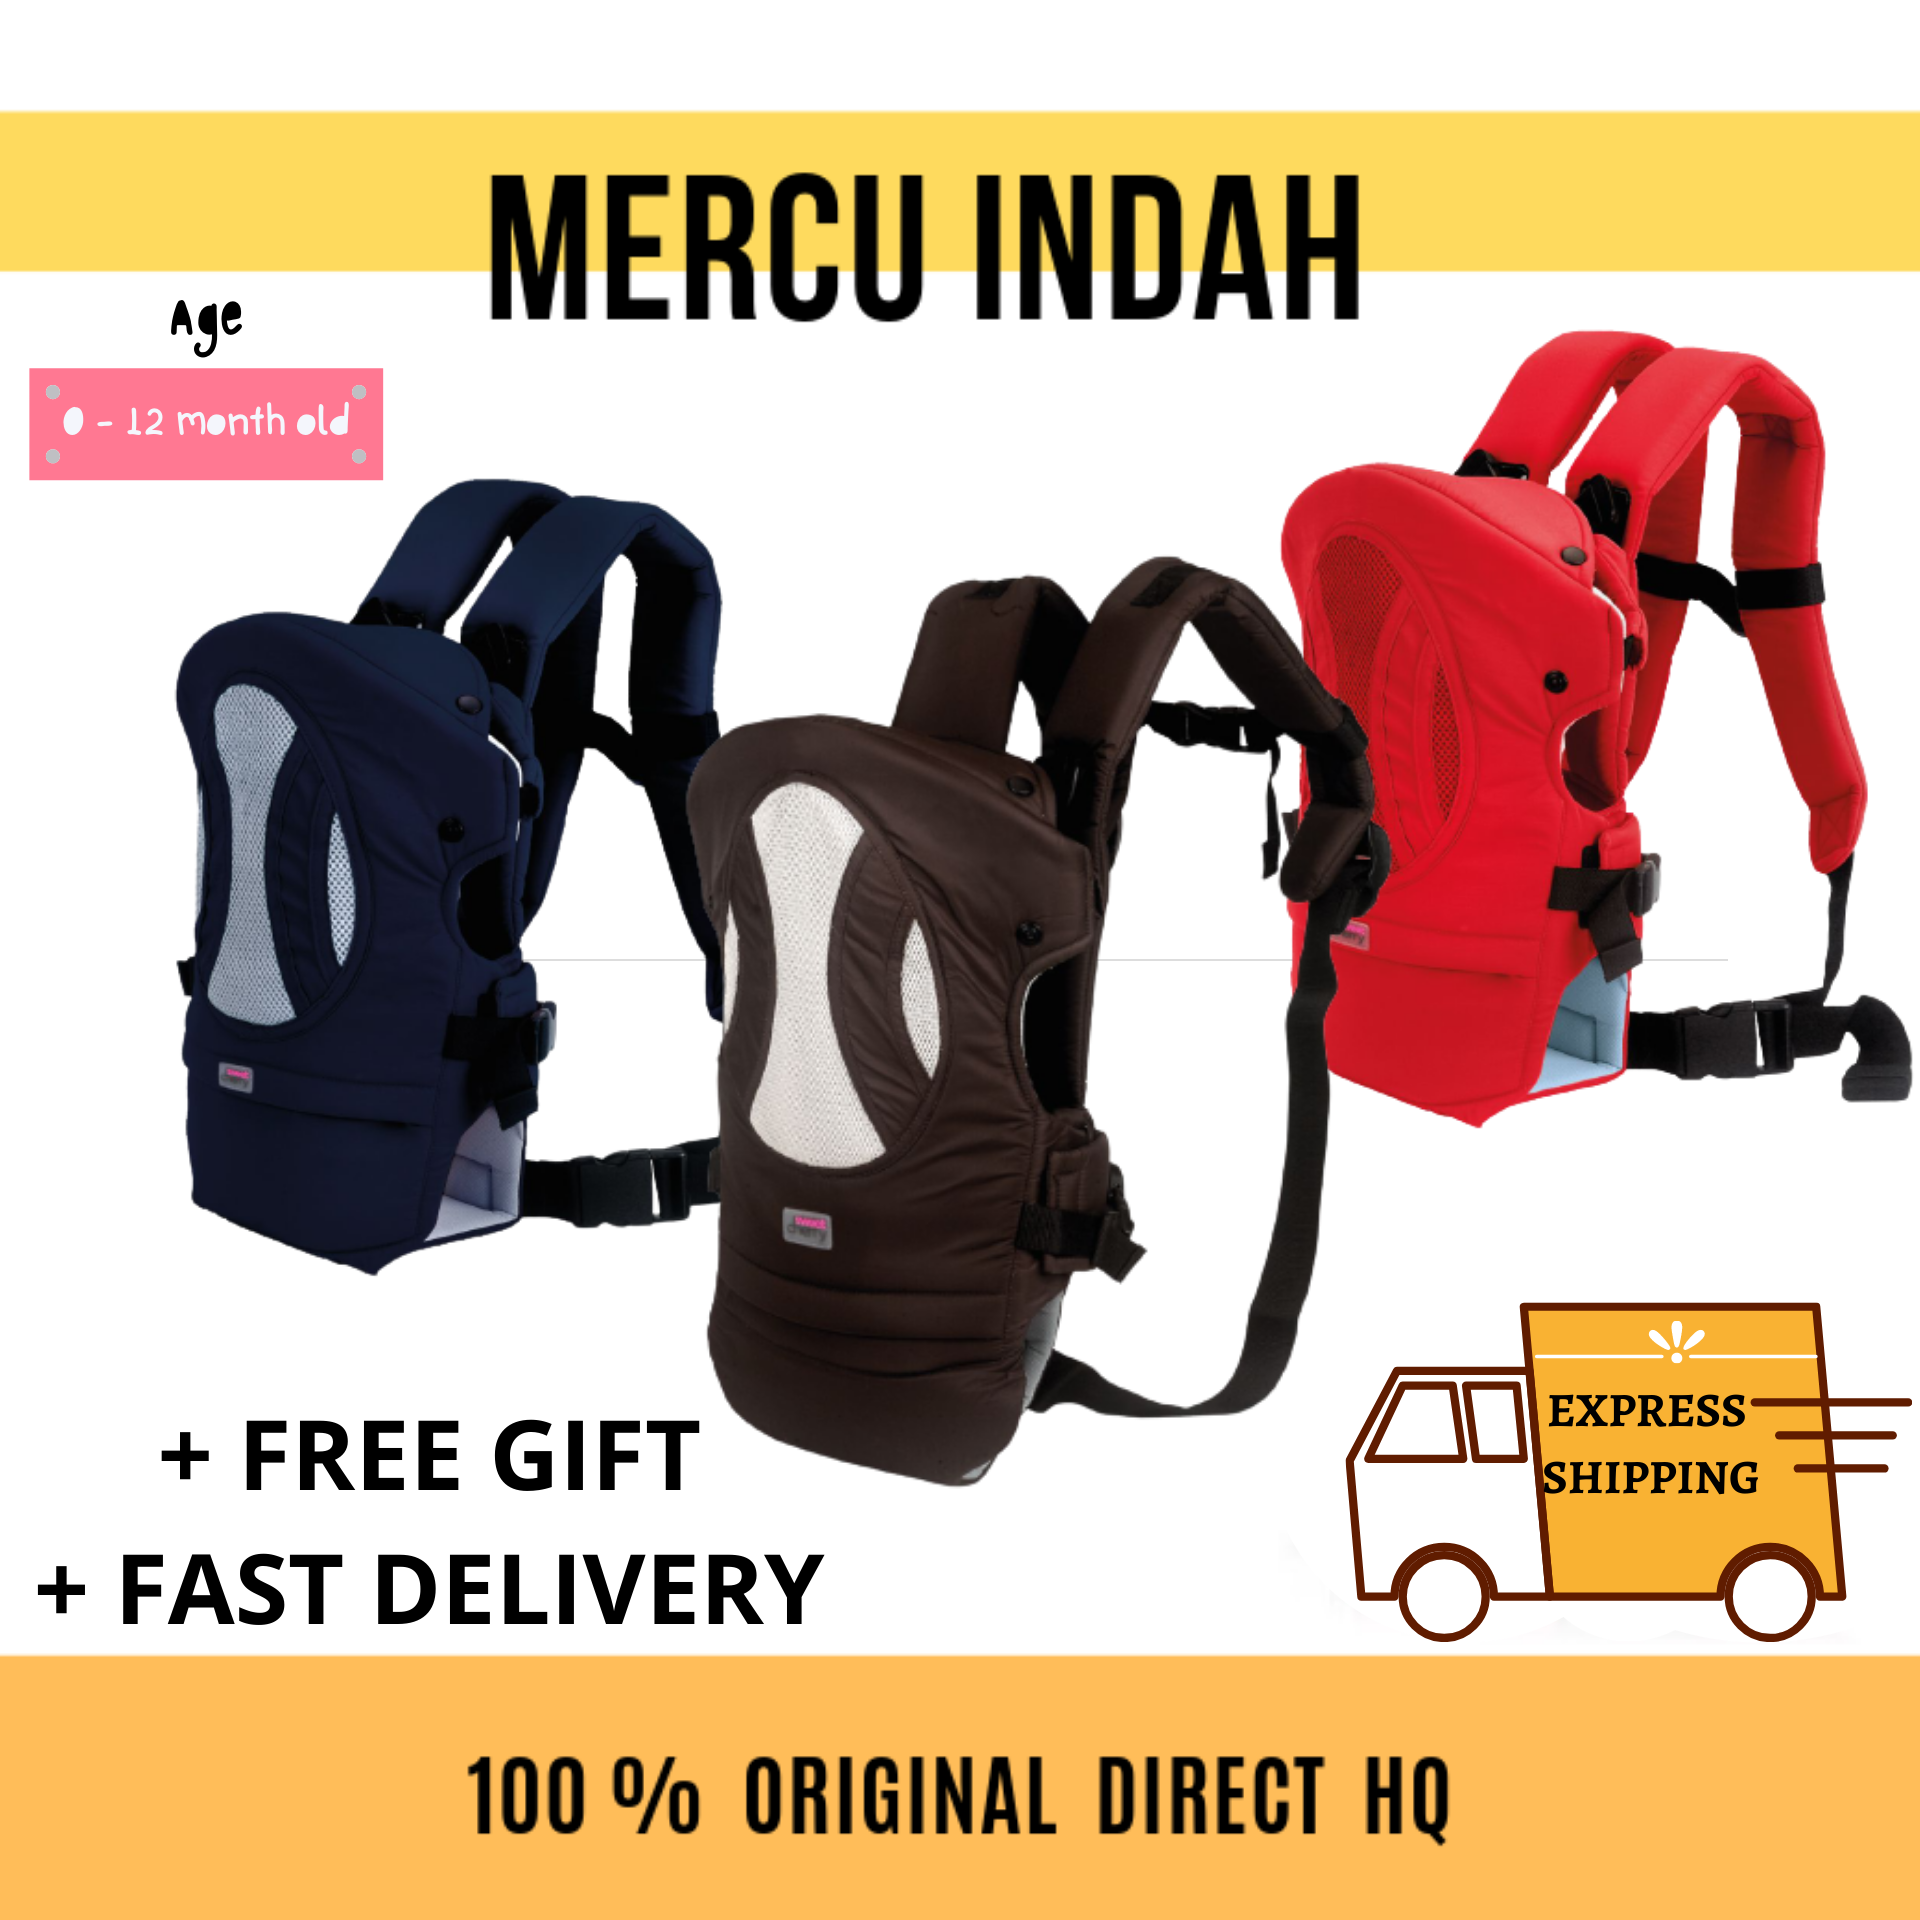 HOT ITEM]- SWEET CHERRY BABY CARRIER / CARRIER / SC650 OVAL / 4 WAYS BABY  CARRIER / SUITALE FOR NEWBORN